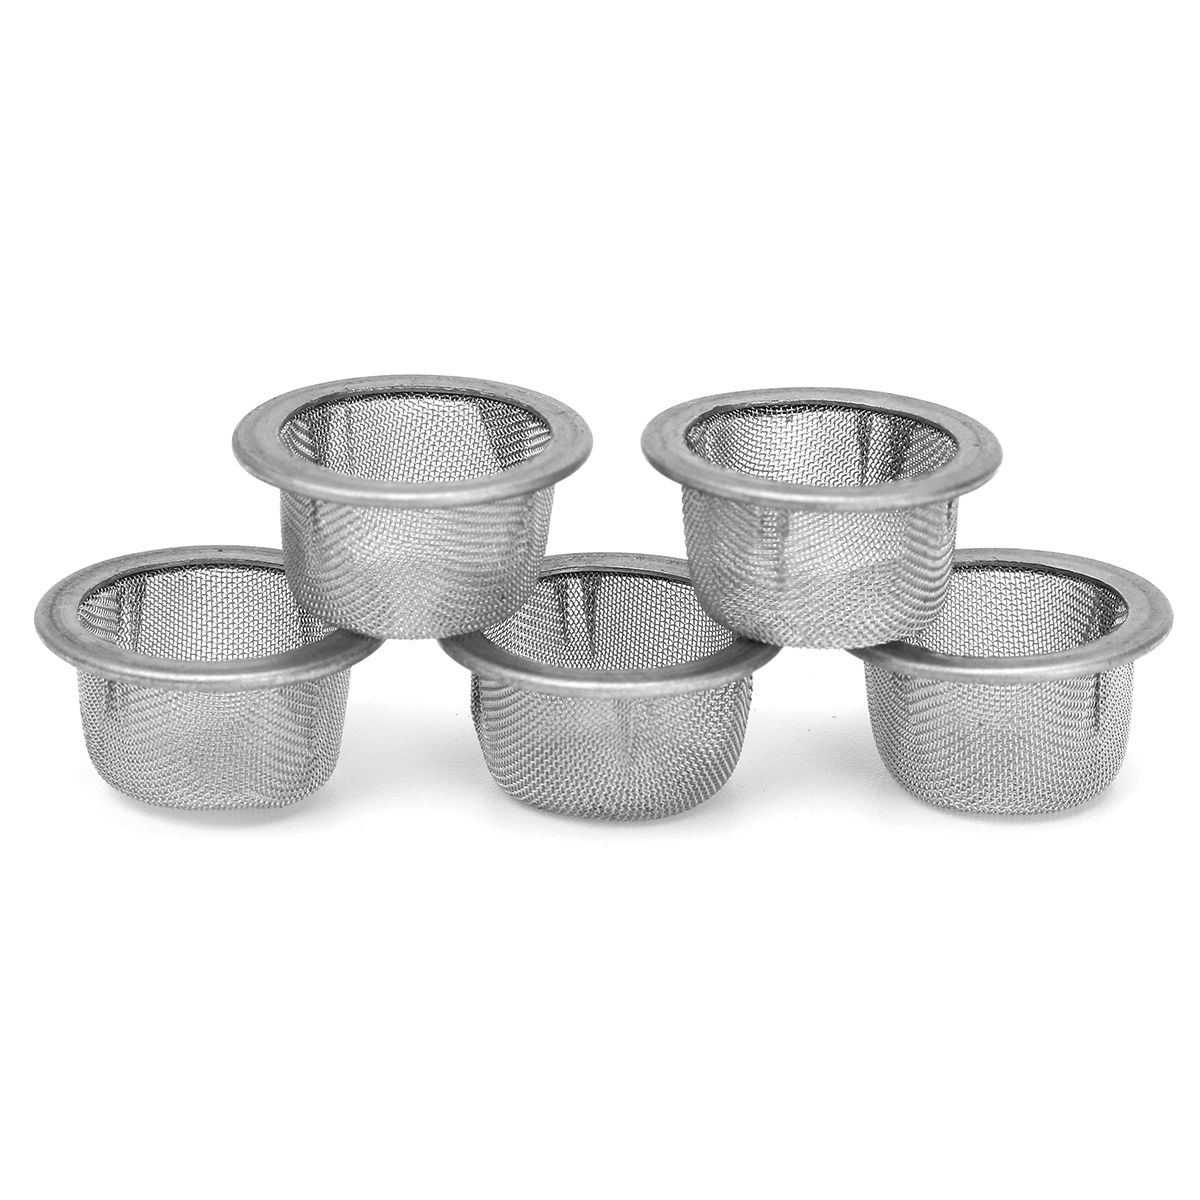 5Pcs-12mm-Dome-Slide-Screen-Meshes-Stainless-Steel-Cup-Filter-Replacement-1141079